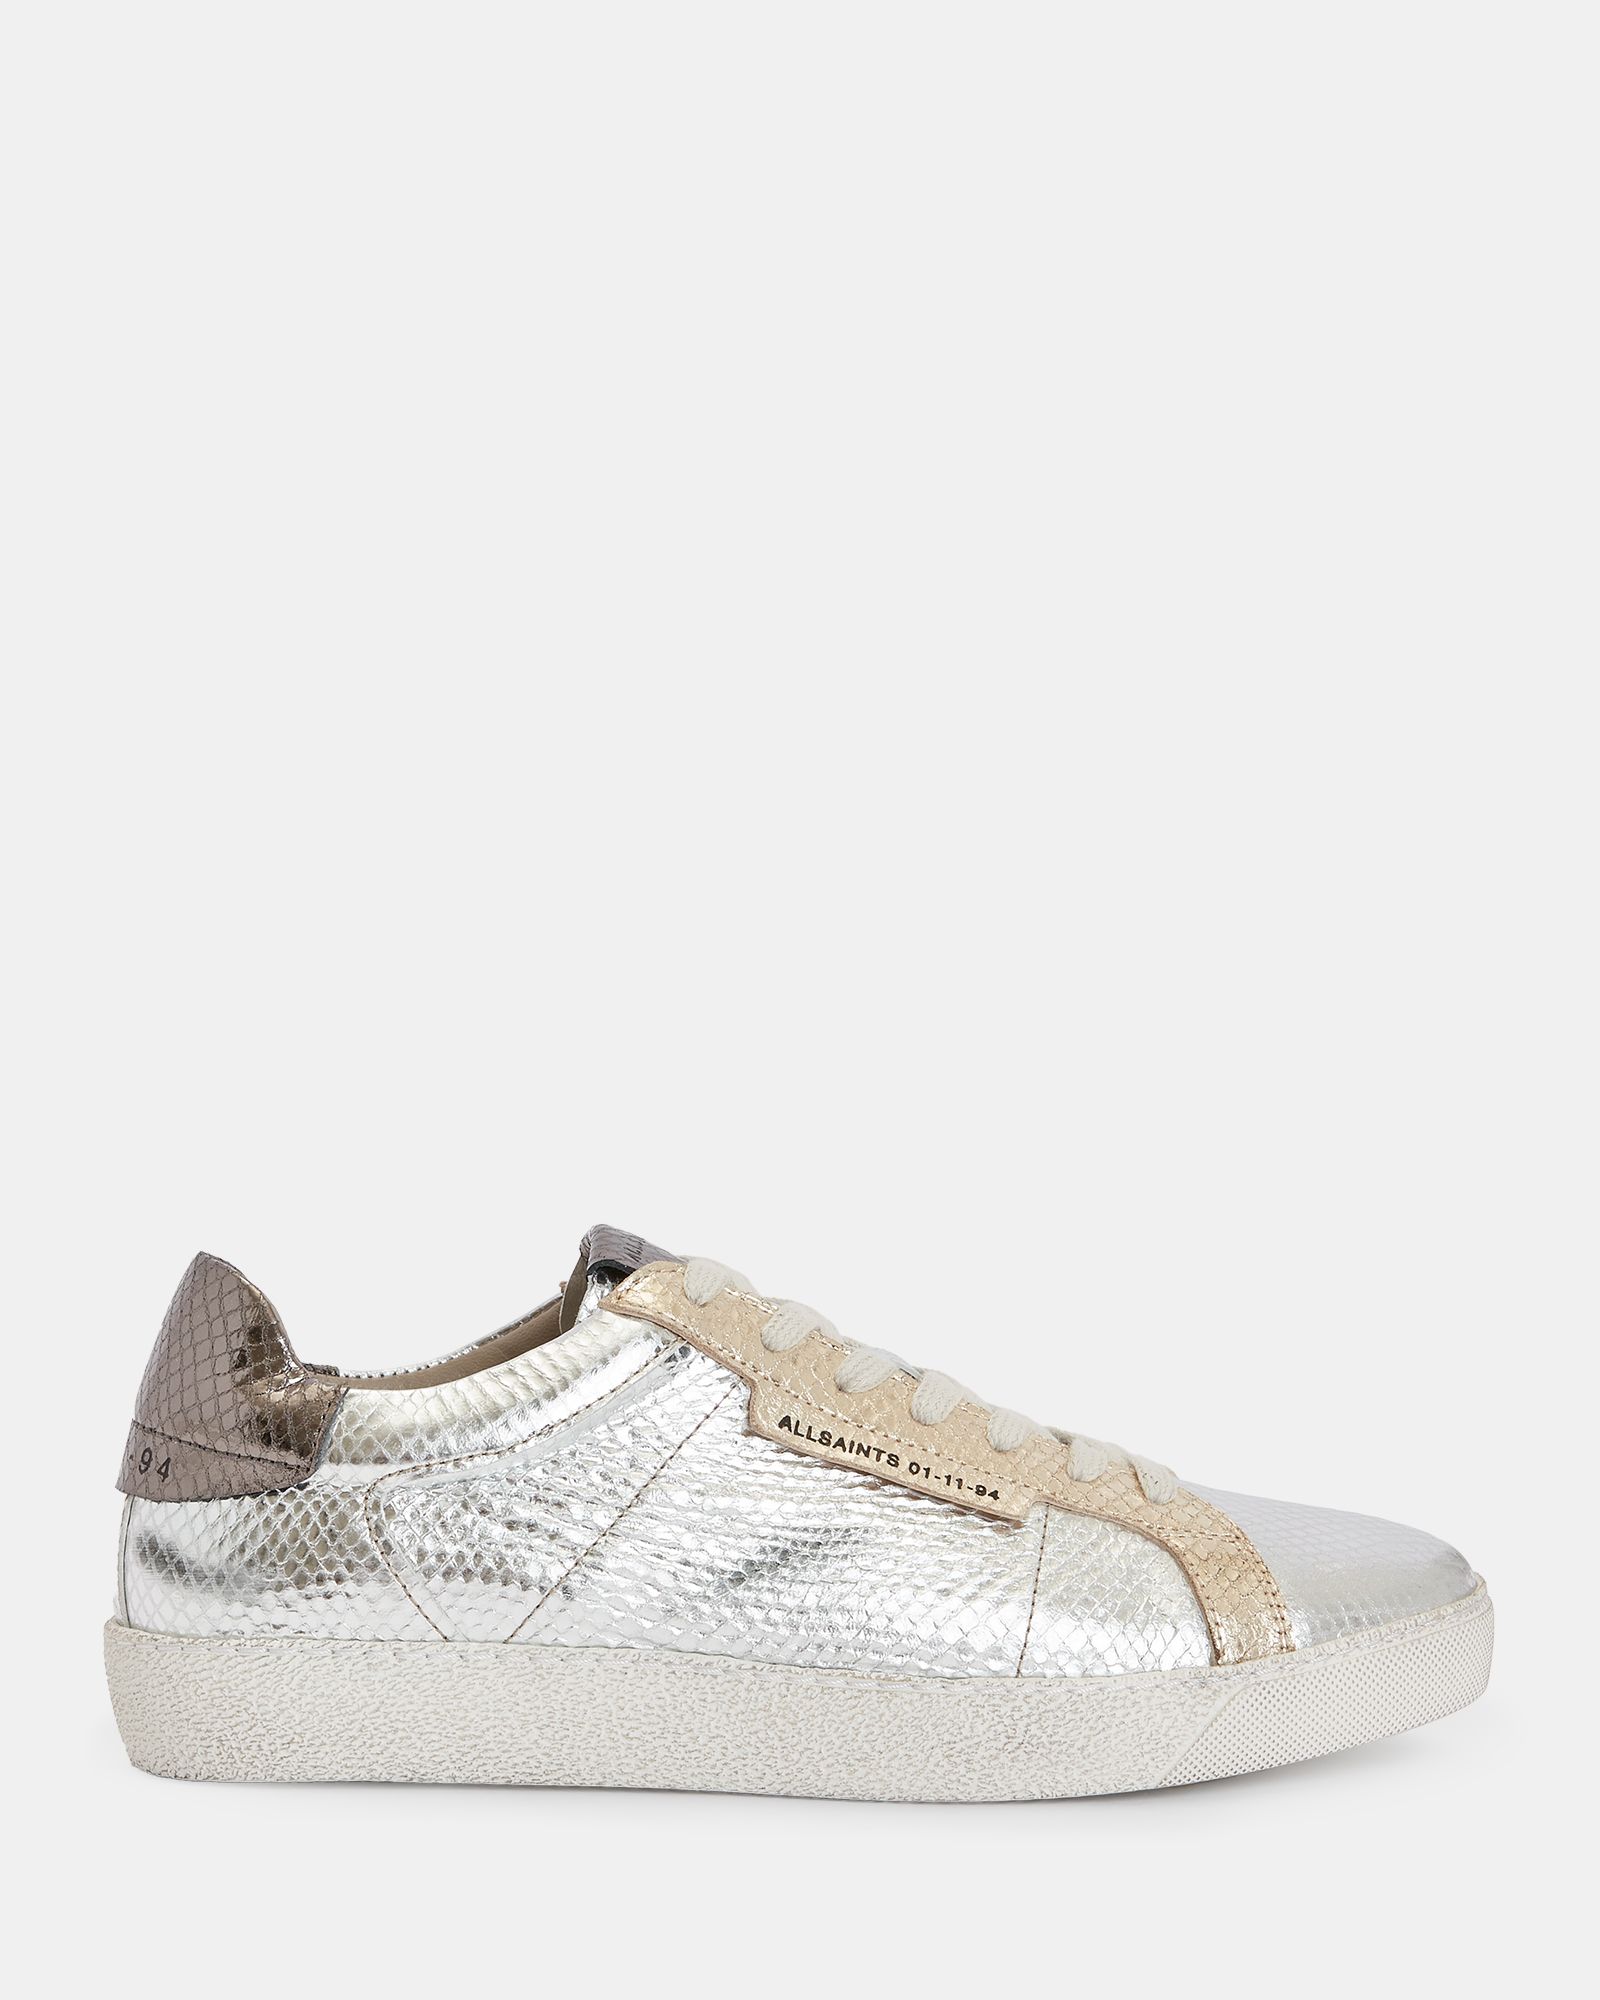 Sheer Leather Low Top Sneakers Silver/Gold | ALLSAINTS US | AllSaints US